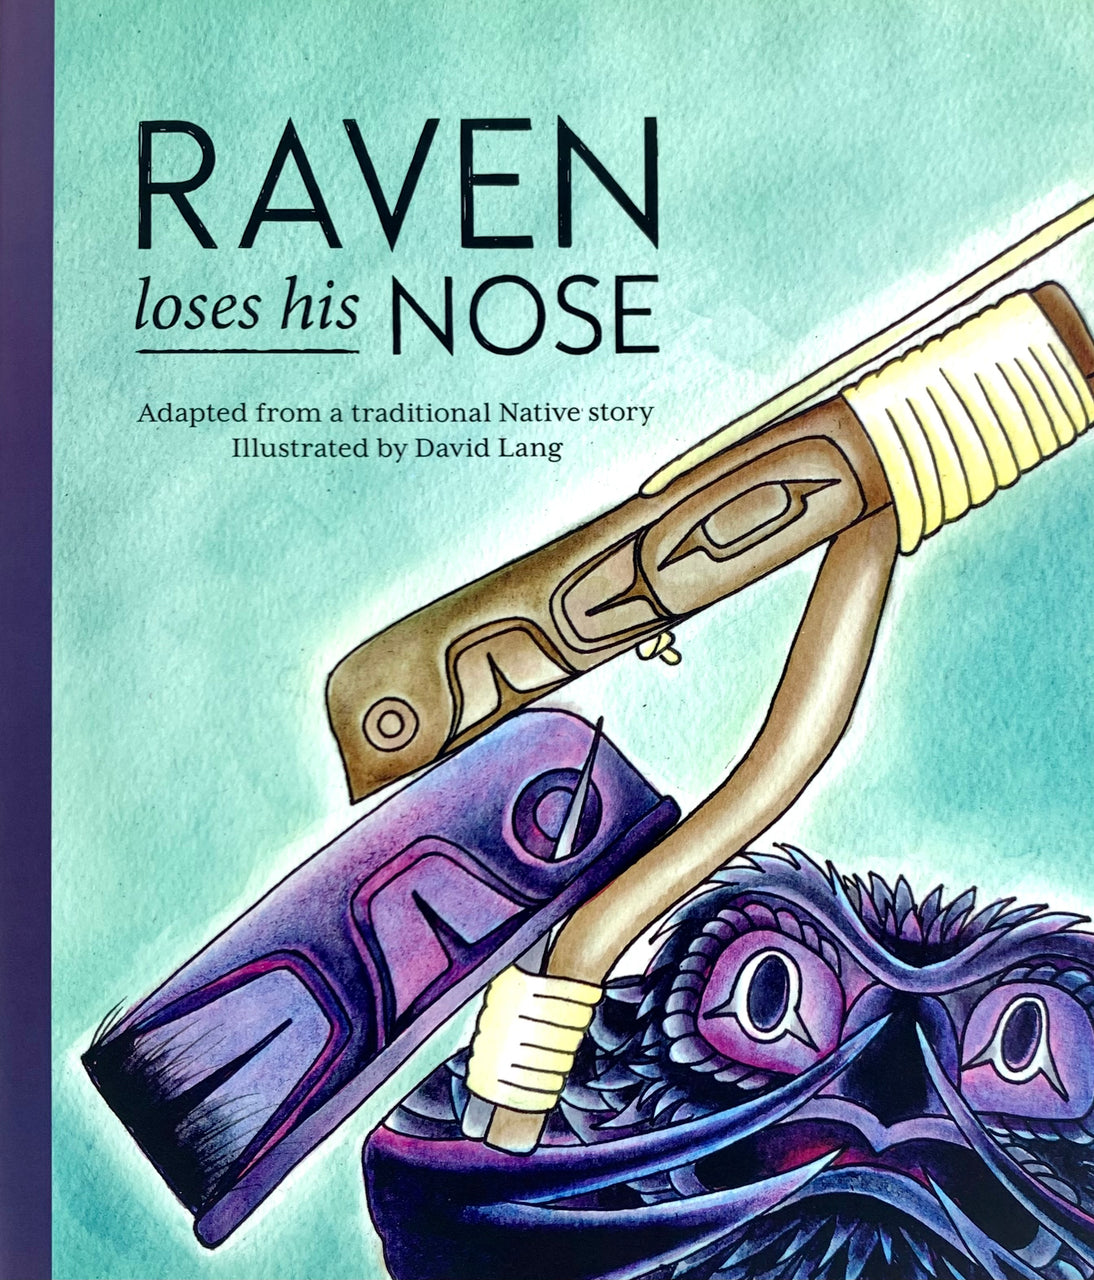 Raven loses his Nose